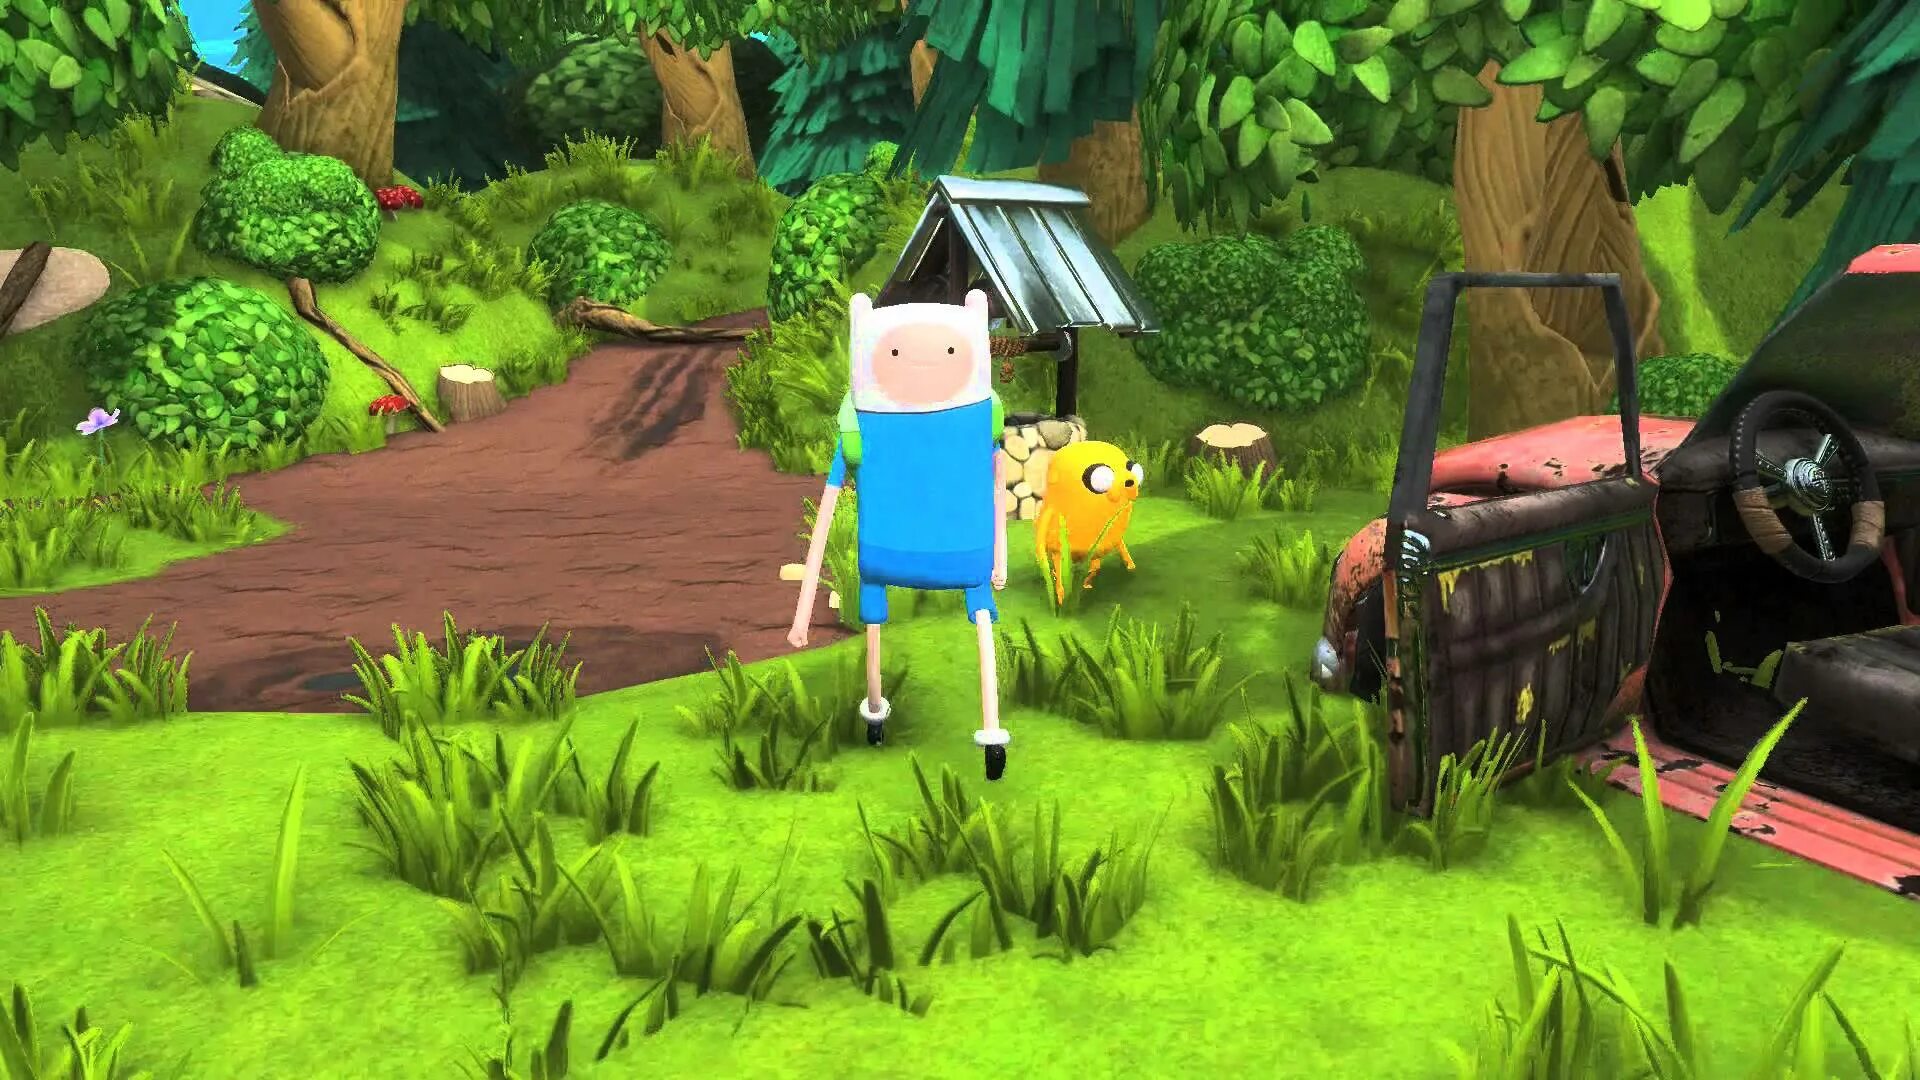 Игра Adventure time: Finn and Jake investigations. Adventure time ps3. Adventure time Finn and Jake investigations ps3. Adventure time: Finn & Jake investigations 3ds.